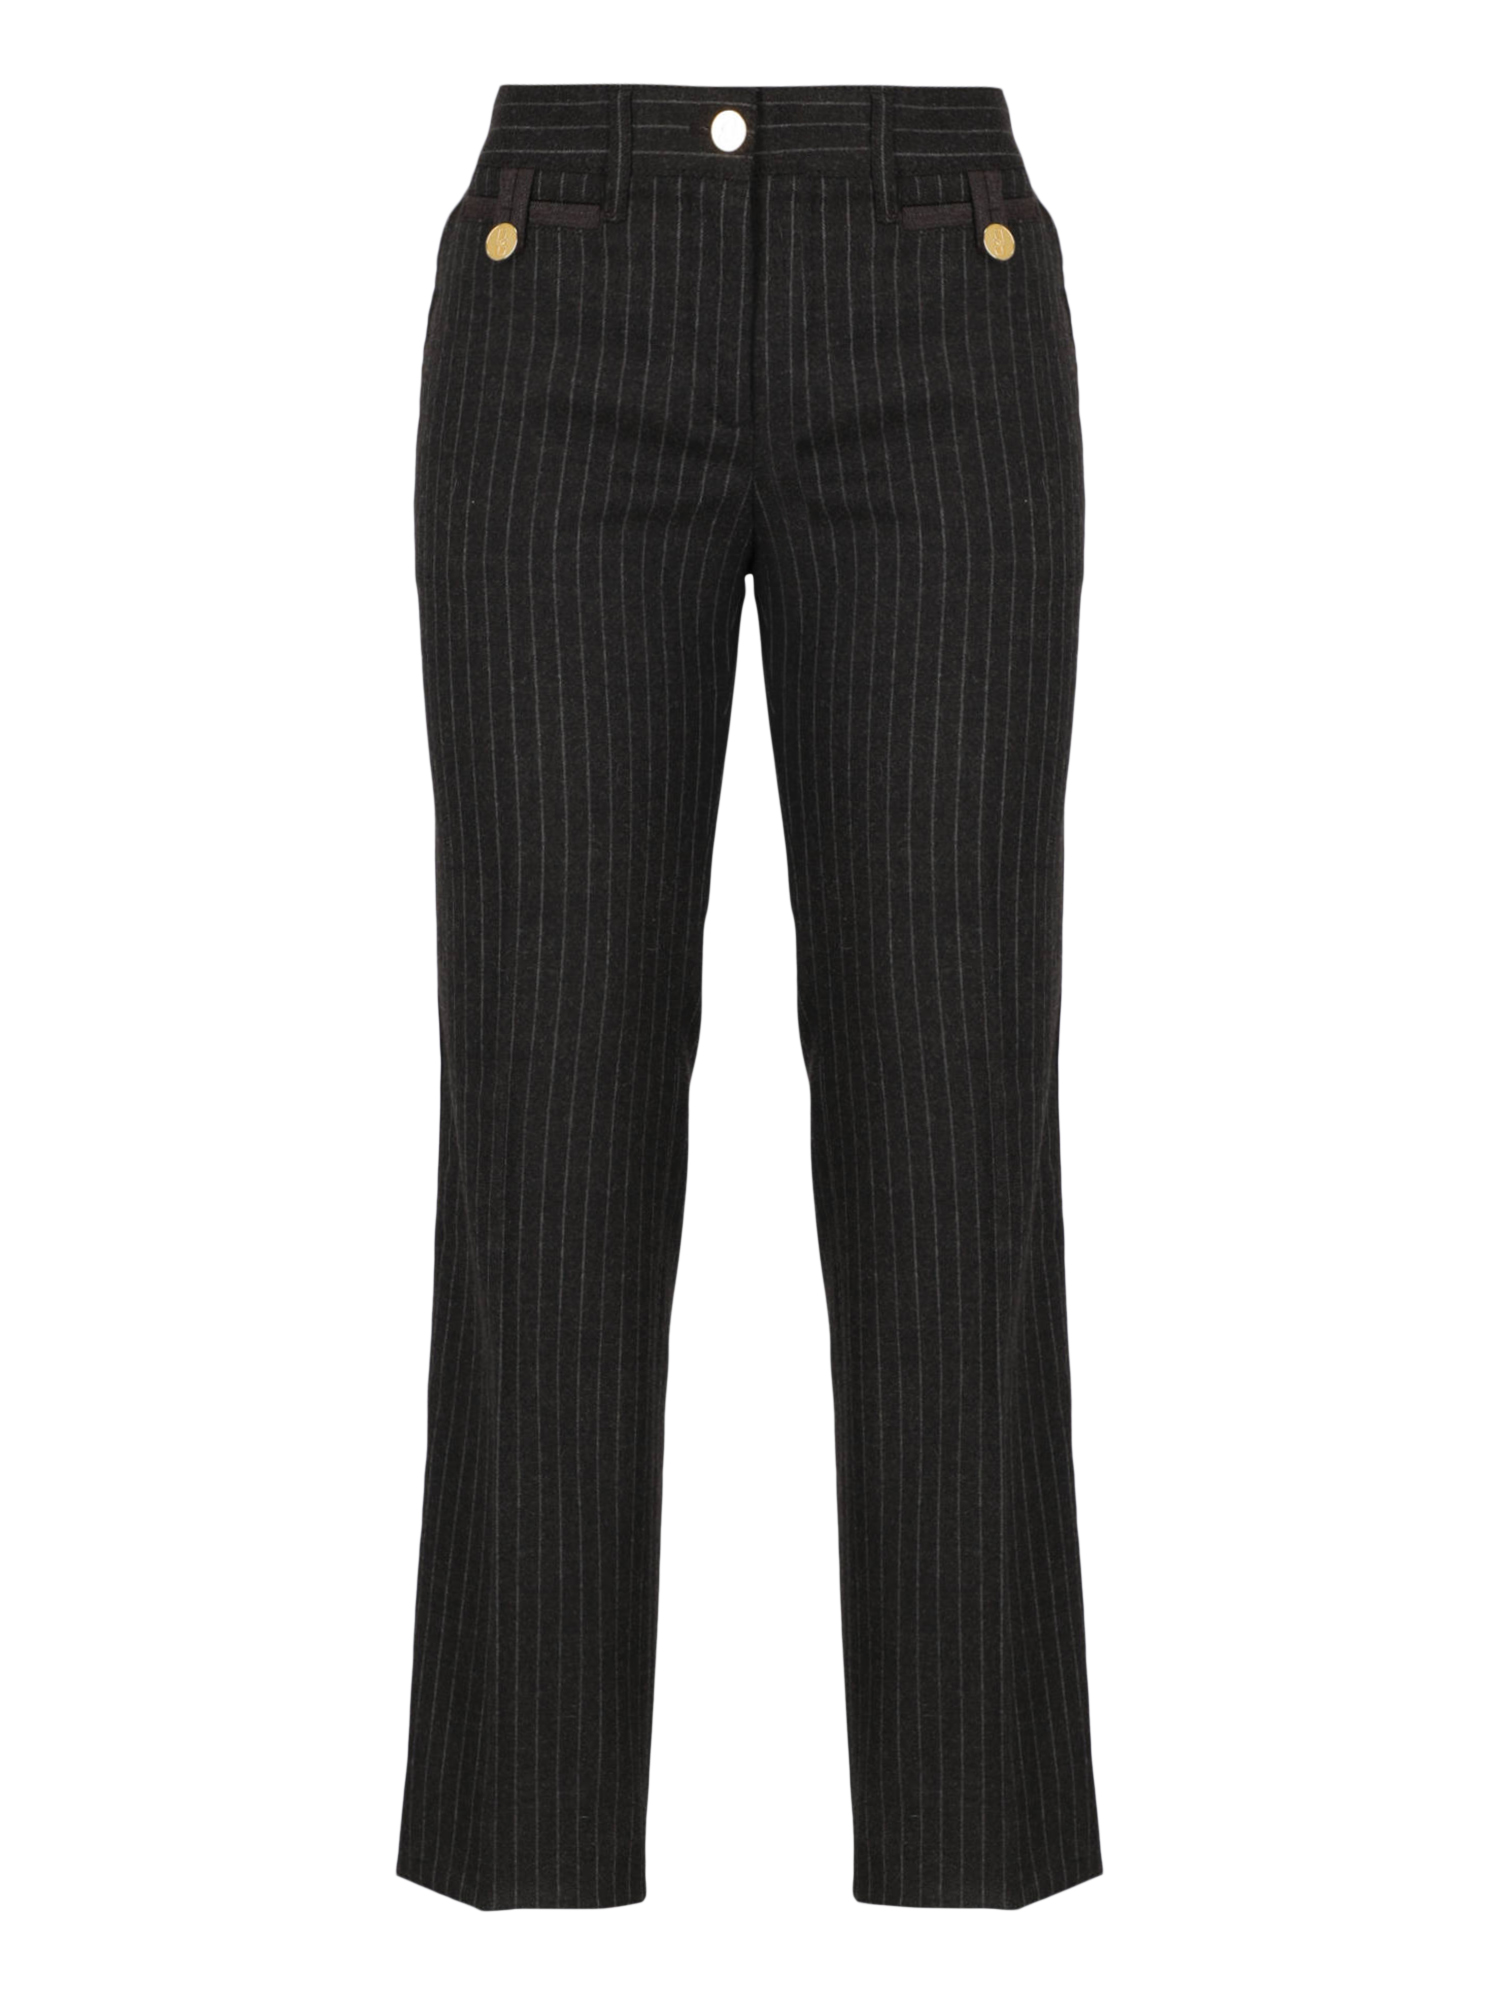 Pre-owned Dolce & Gabbana Women's Trousers -  - In Brown Wool